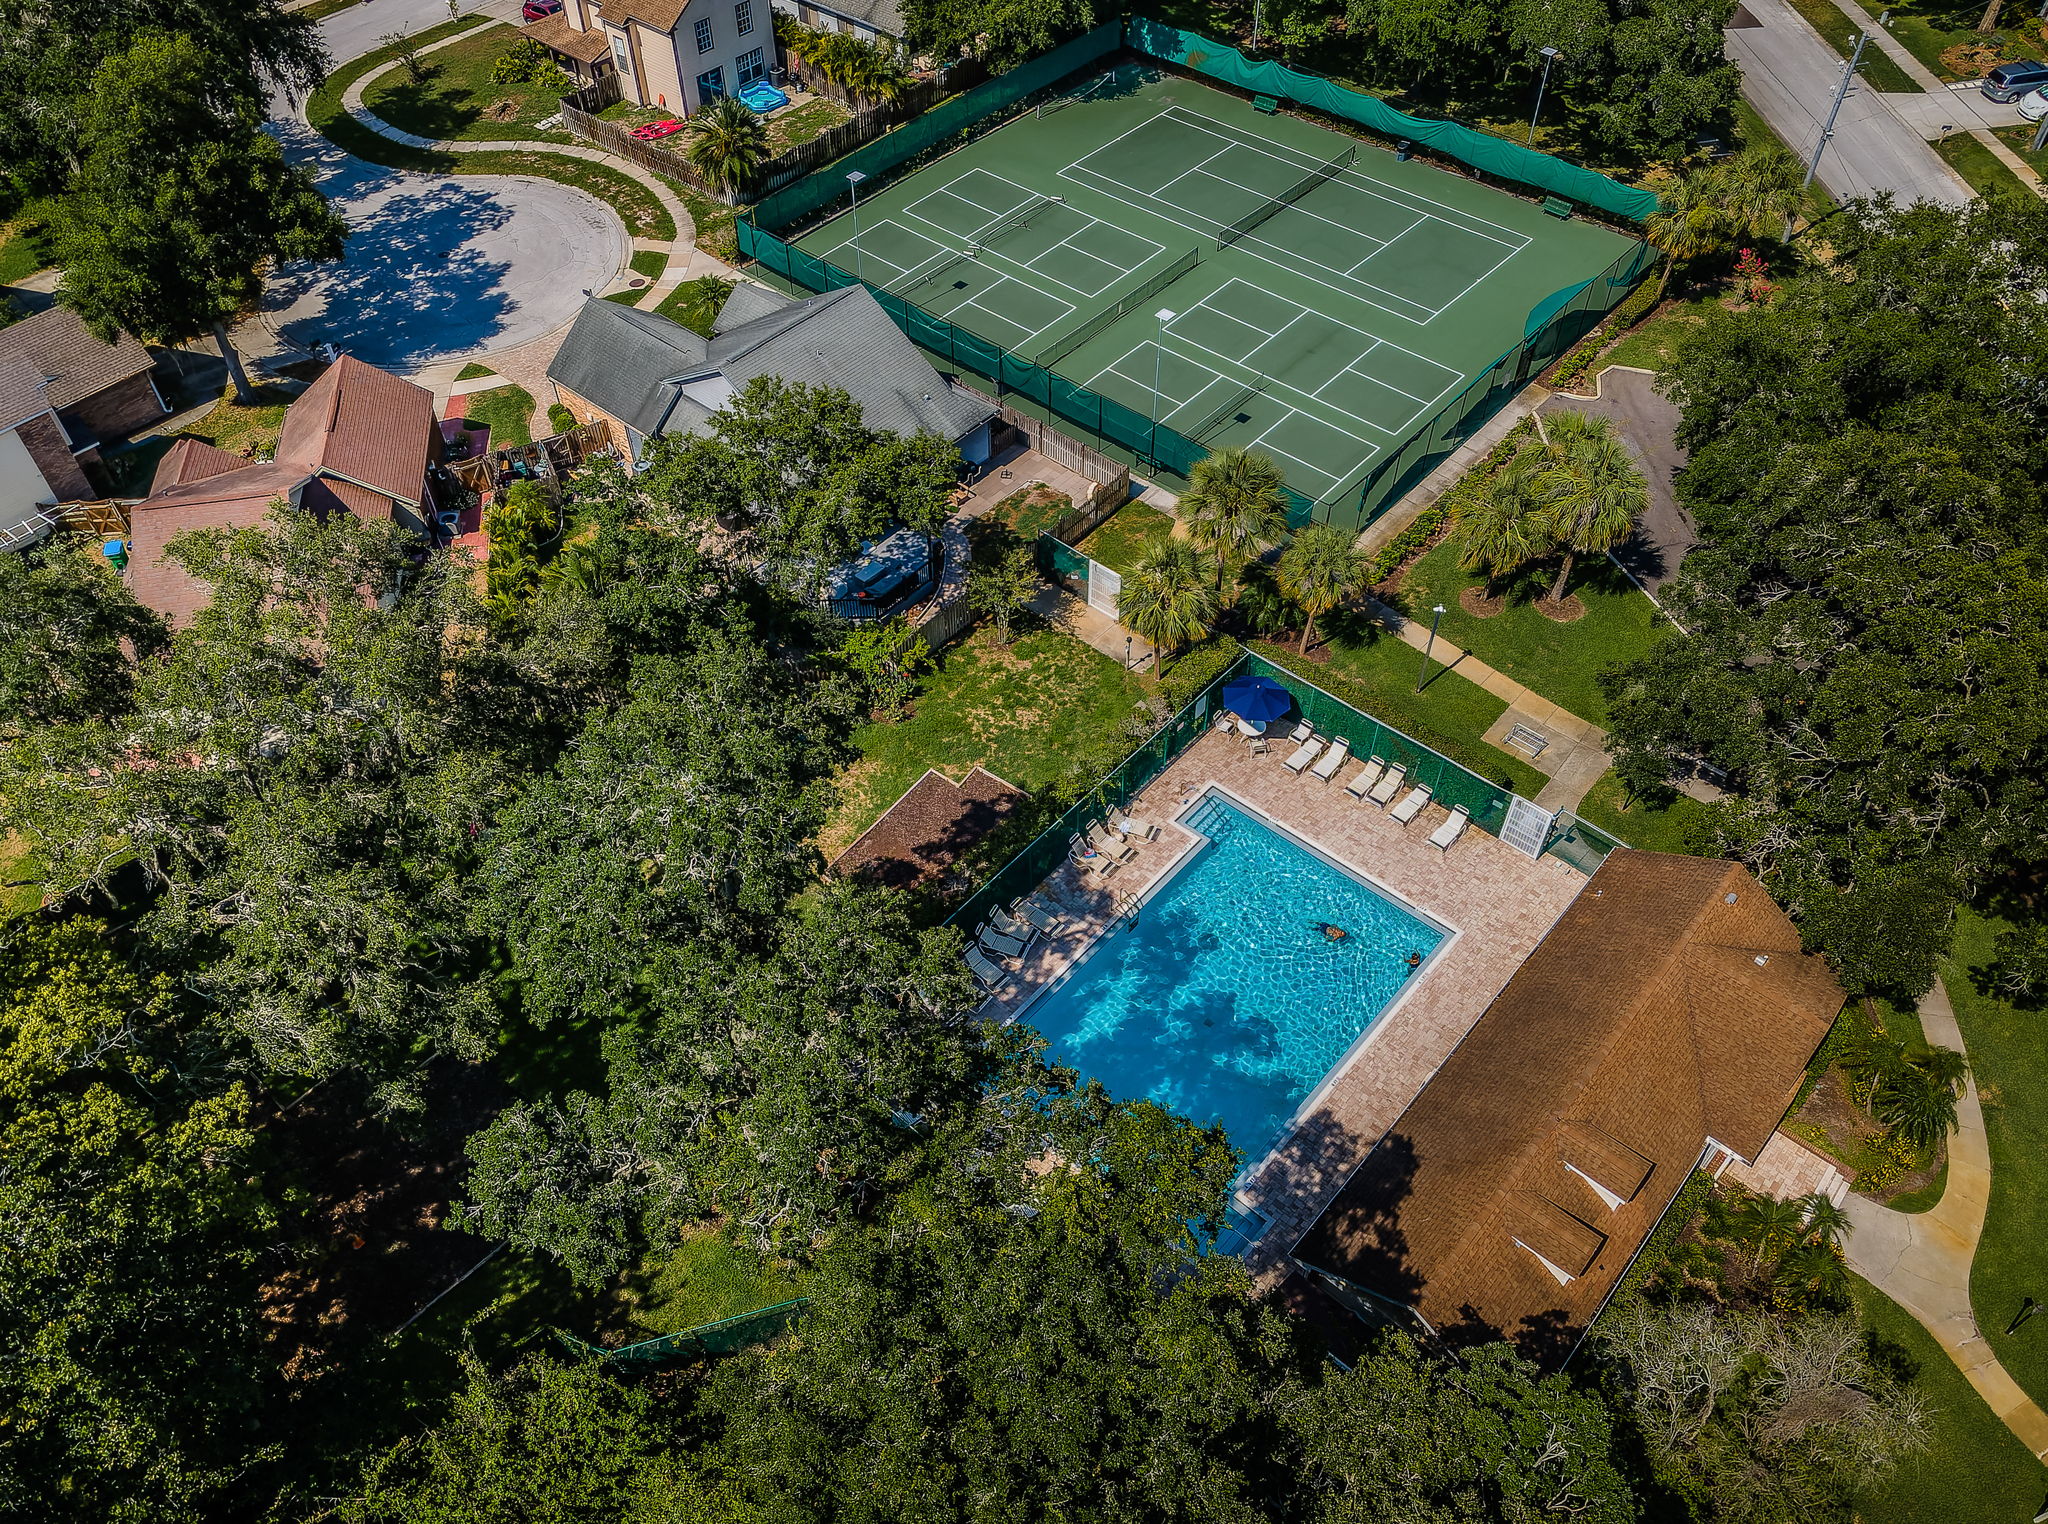 Pool, Tennis and Pickelball Courts3